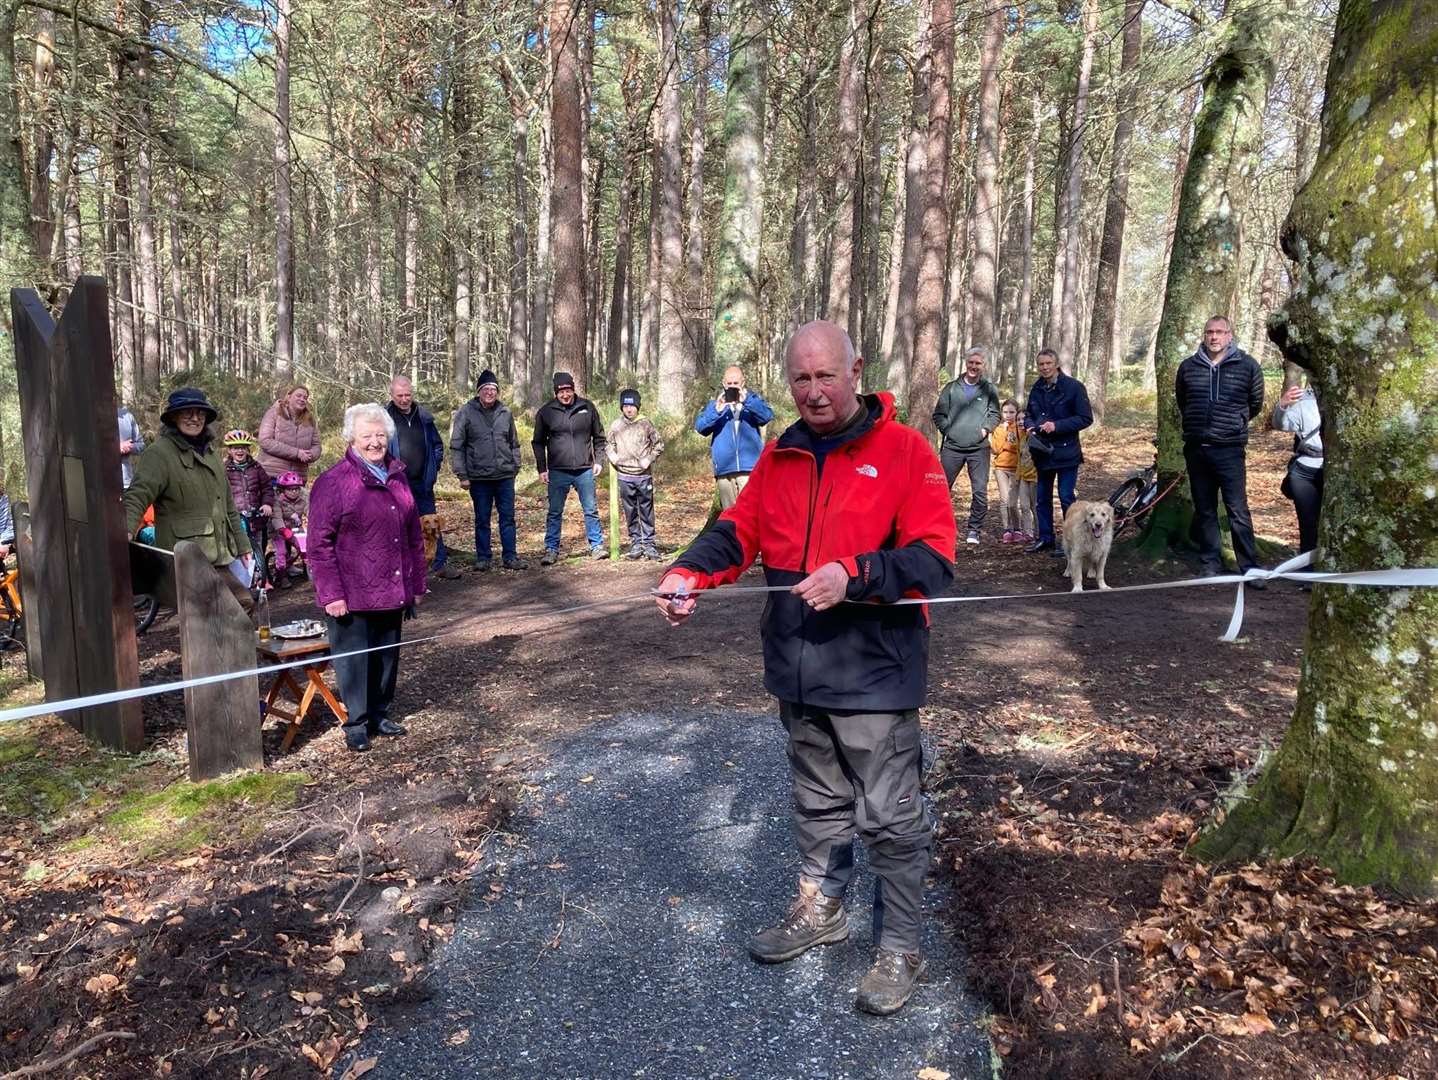 Golspie community councillor cuts a ribbon to officially open the path.